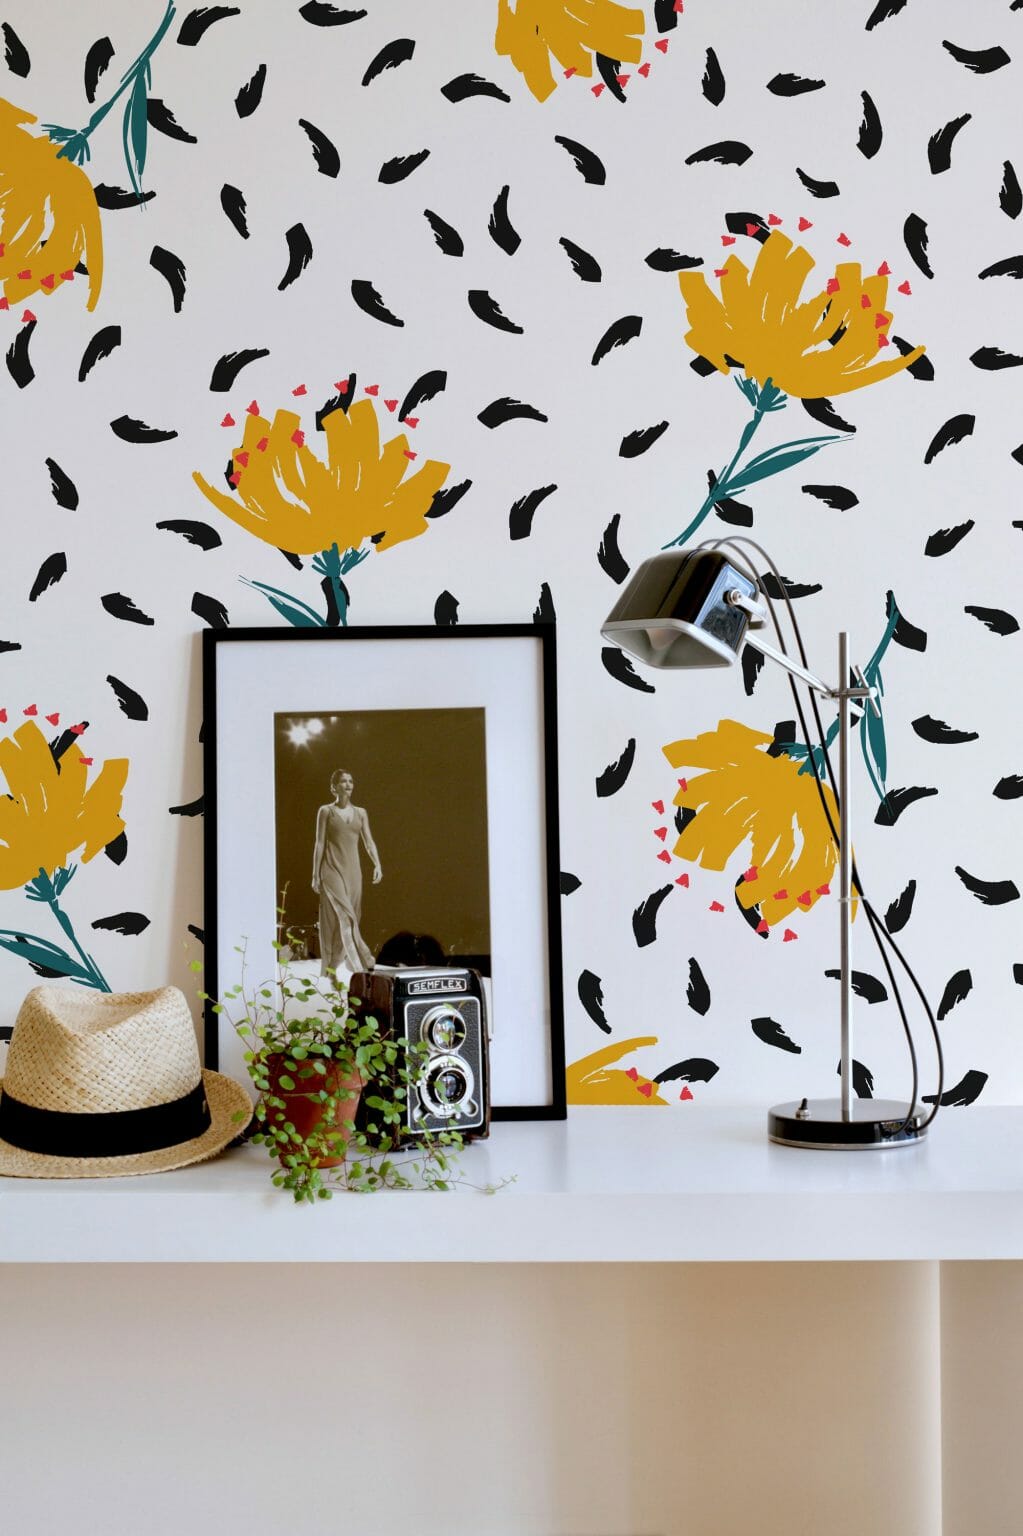 Black and white floral peel and stick wallpaper | Fancy Walls